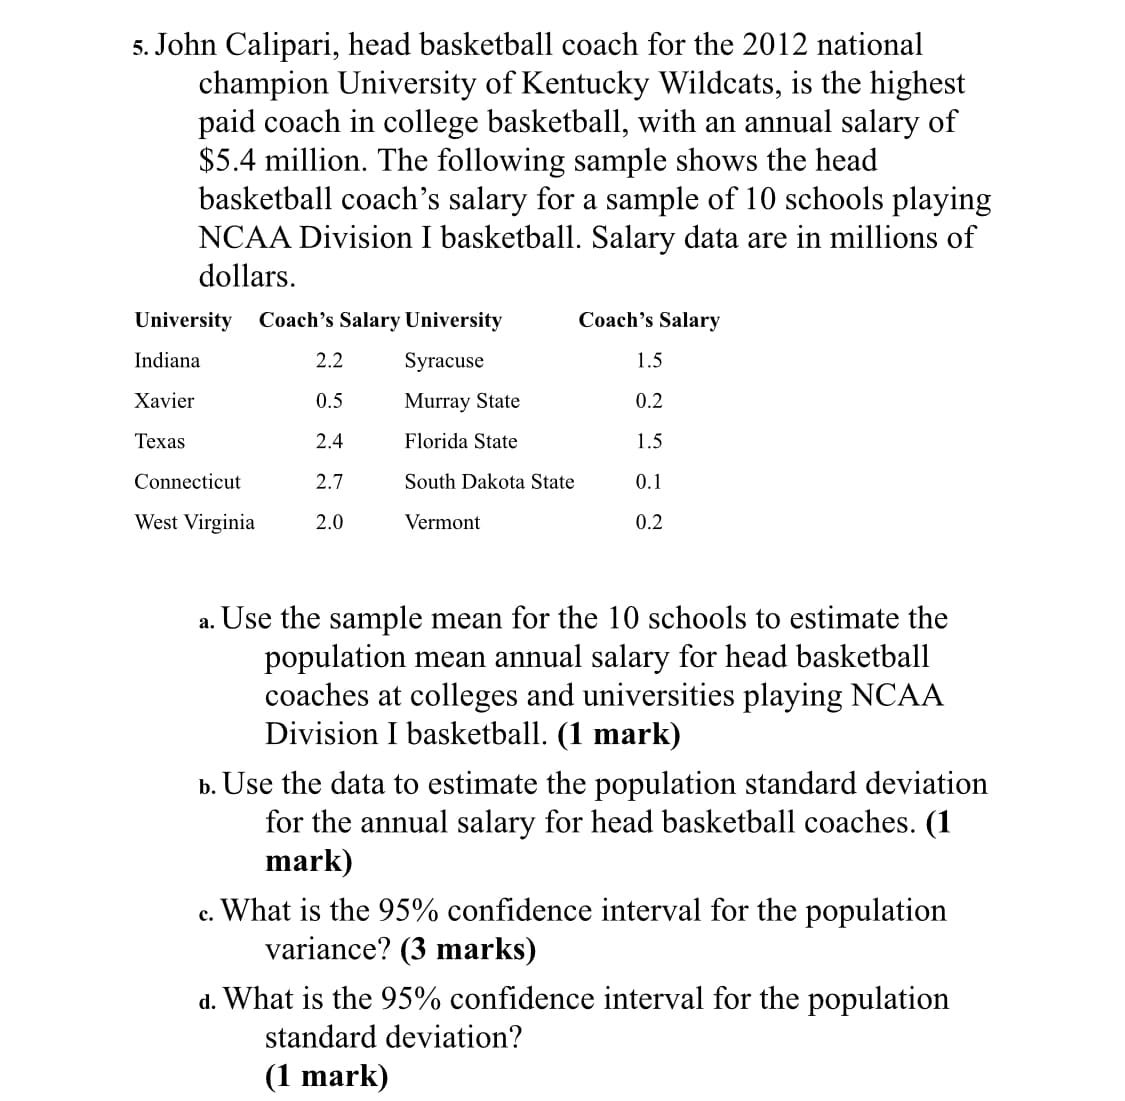 5. John Calipari, head basketball coach for the 2012 national
champion University of Kentucky Wildcats, is the highest
paid coach in college basketball, with an annual salary of
$5.4 million. The following sample shows the head
basketball coach's salary for a sample of 10 schools playing
NCAA Division I basketball. Salary data are in millions of
dollars.
University
Coach's Salary University
Coach's Salary
Indiana
2.2
Syracuse
1.5
Xavier
0.5
Murray State
0.2
Texas
24
Florida State
15
